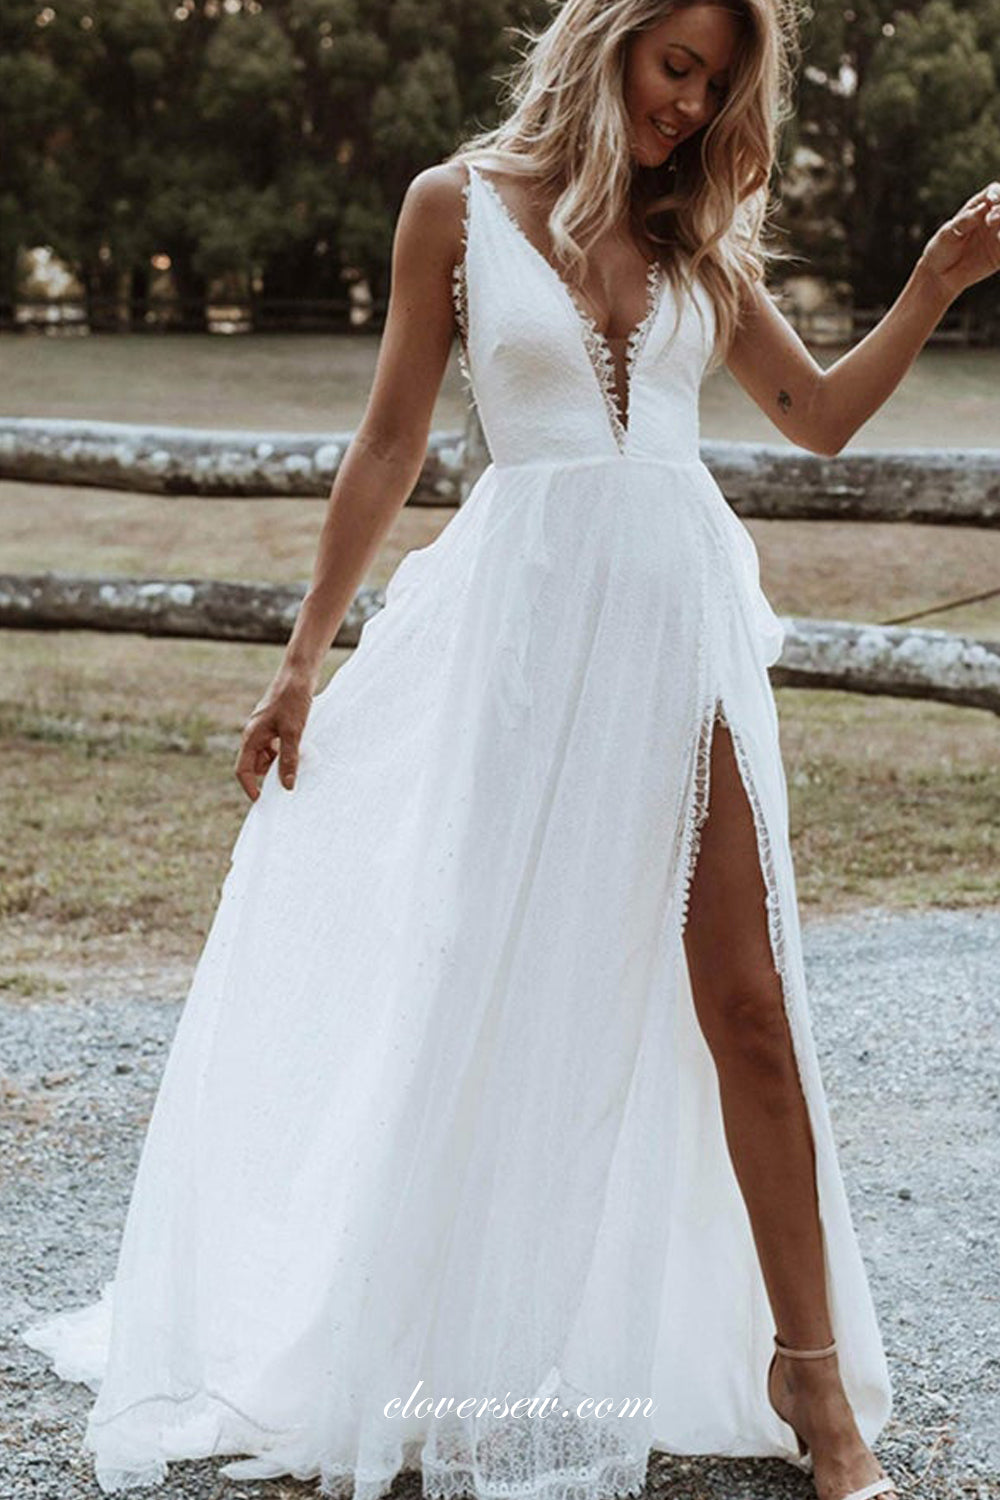 Off White Bohemian Lace Backless Deep V-neck With High Slit Wedding Dresses, CW0343